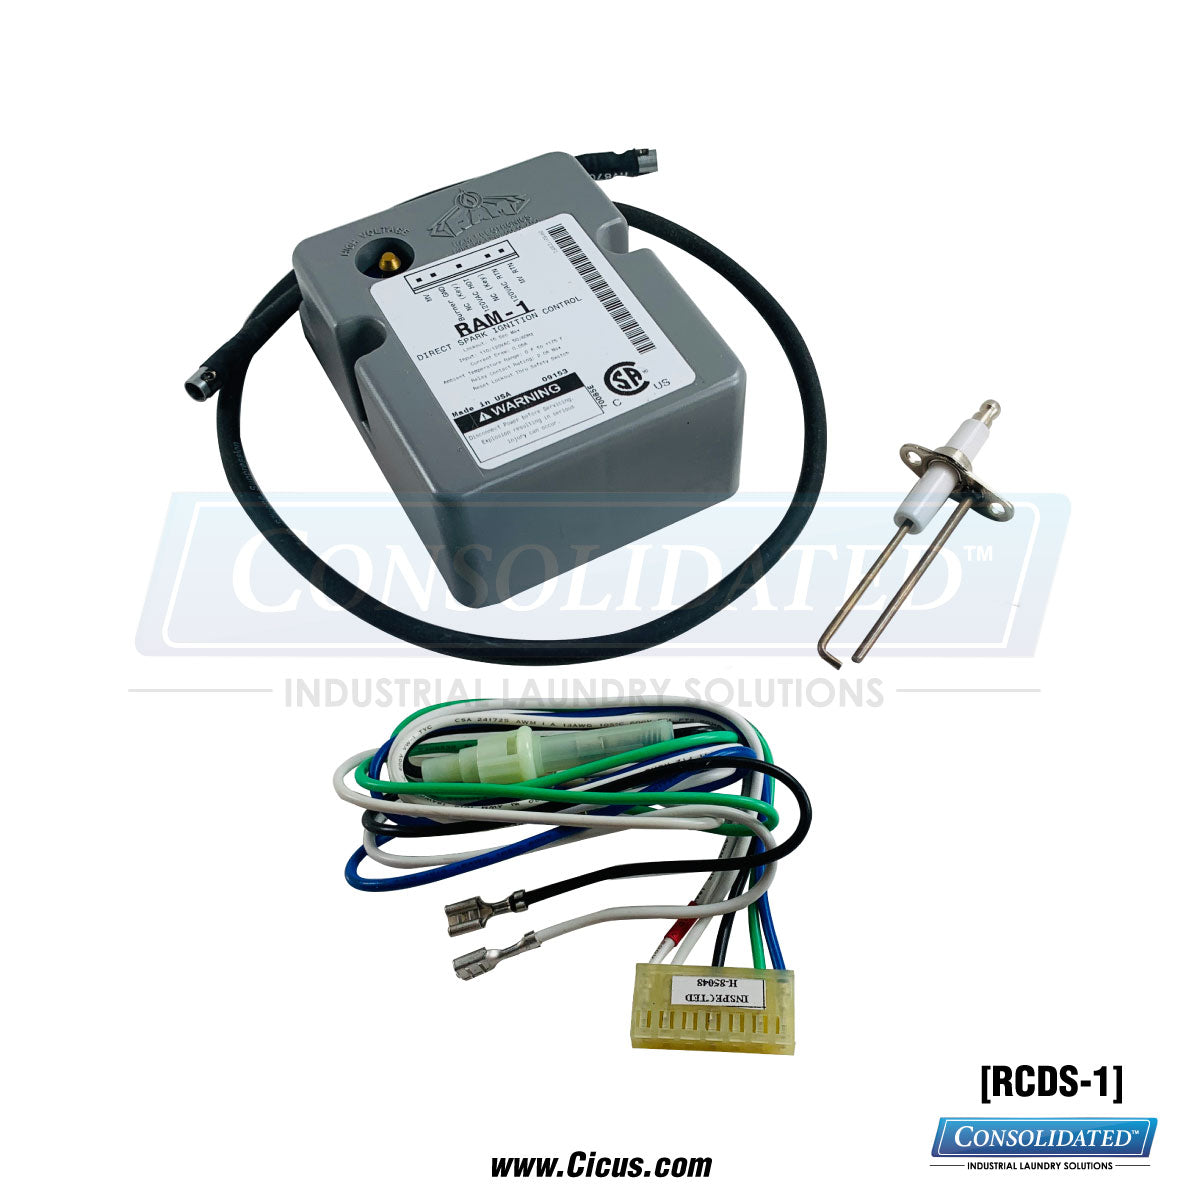 Alliance Laundry Systems Electronic Ignition Kit - 120v [RCDS-1]